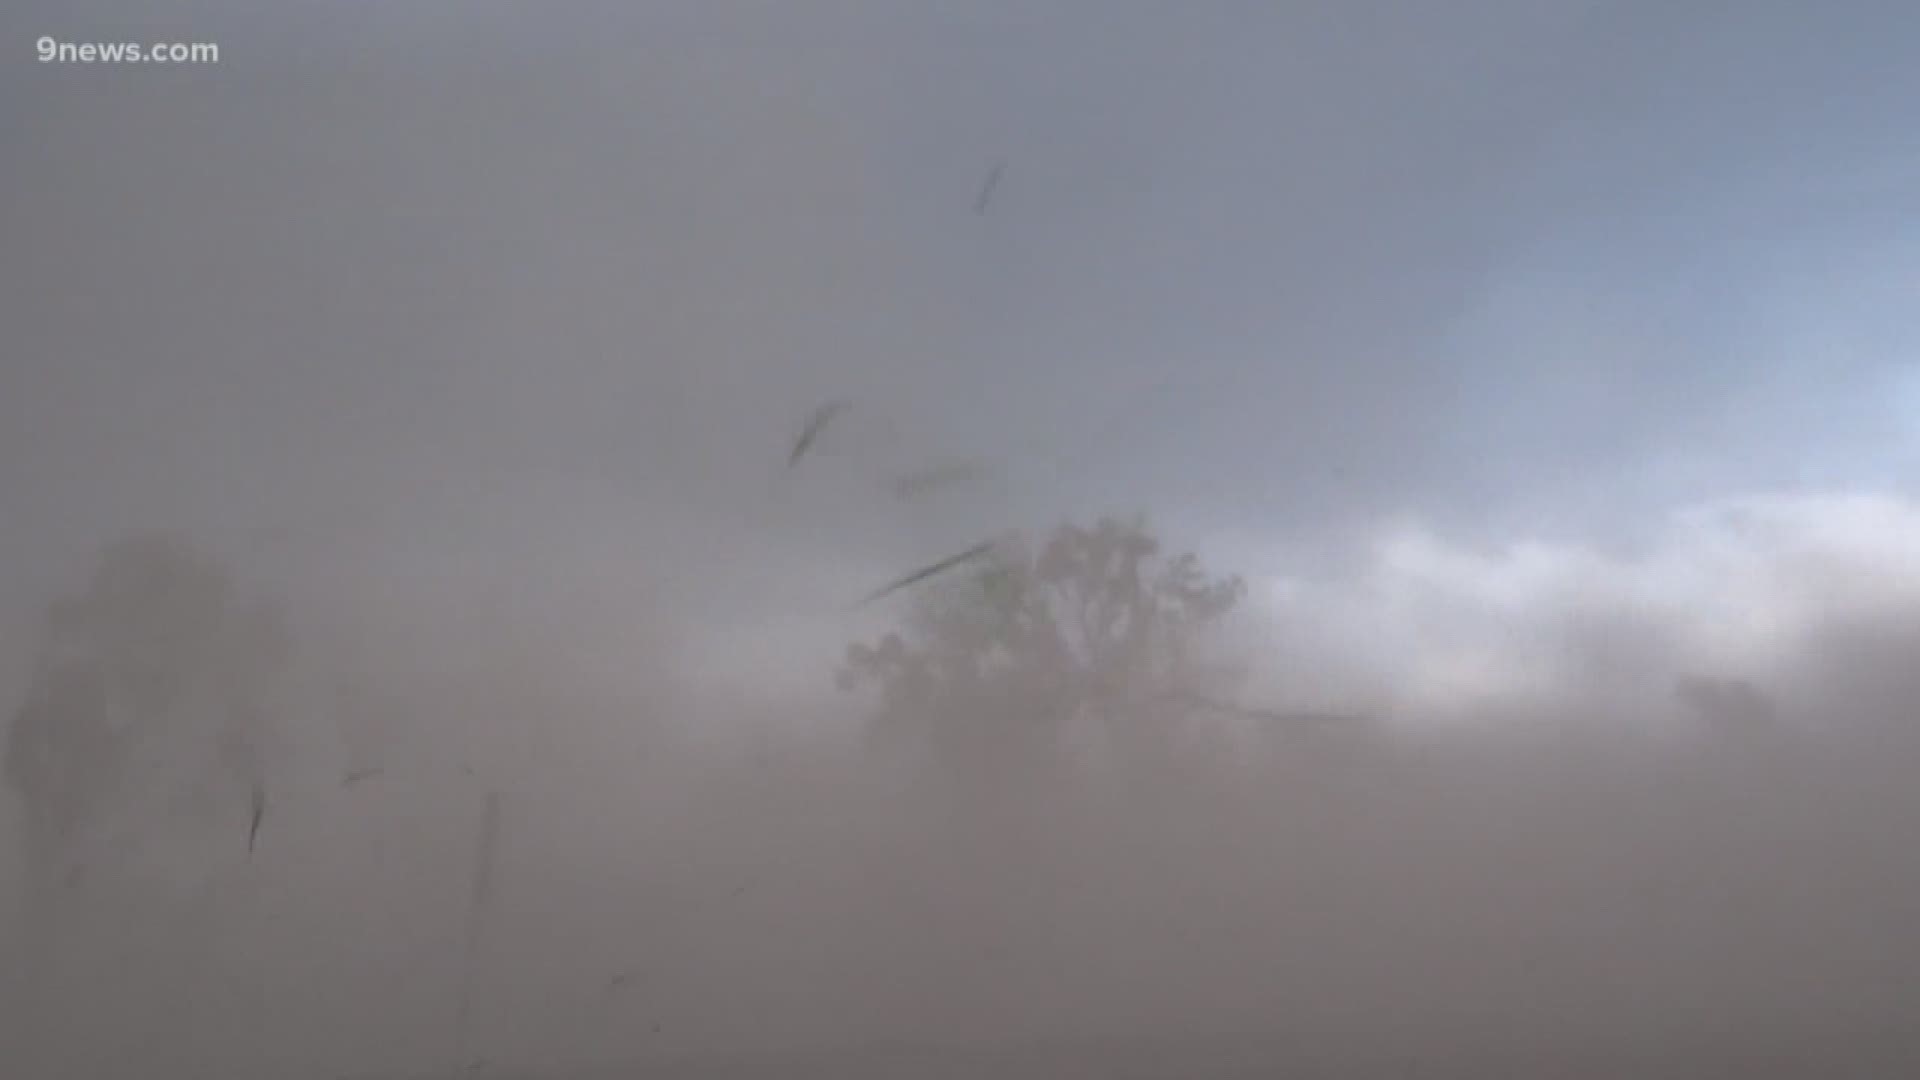 Storm chasers from Colorado were underneath a tornado as it formed in McCook, Nebraska.